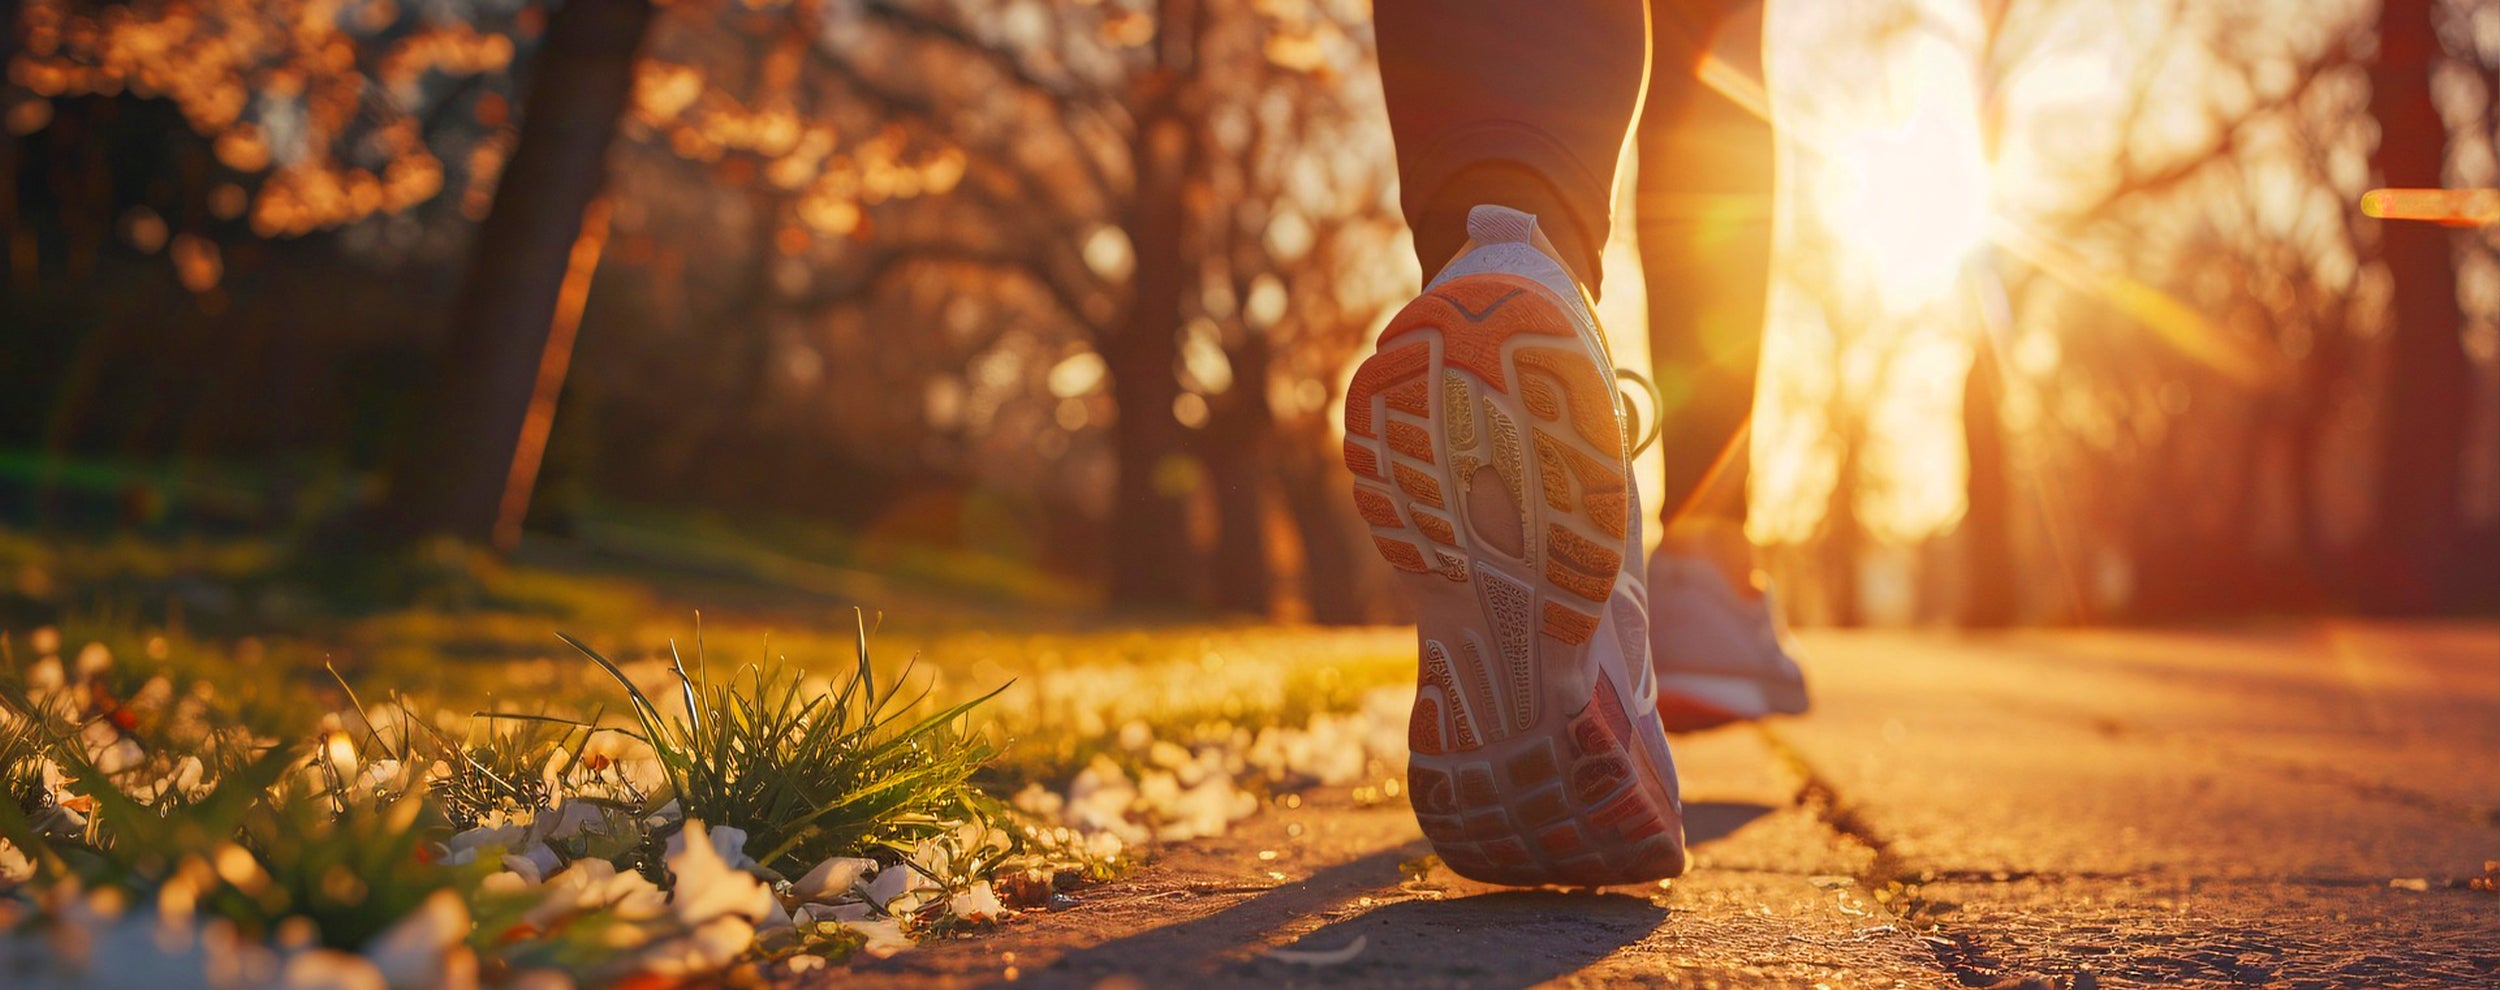 Runner's shoes on a sunlit path, embodying active wellness withPro-Fit's healthy lifestyle.